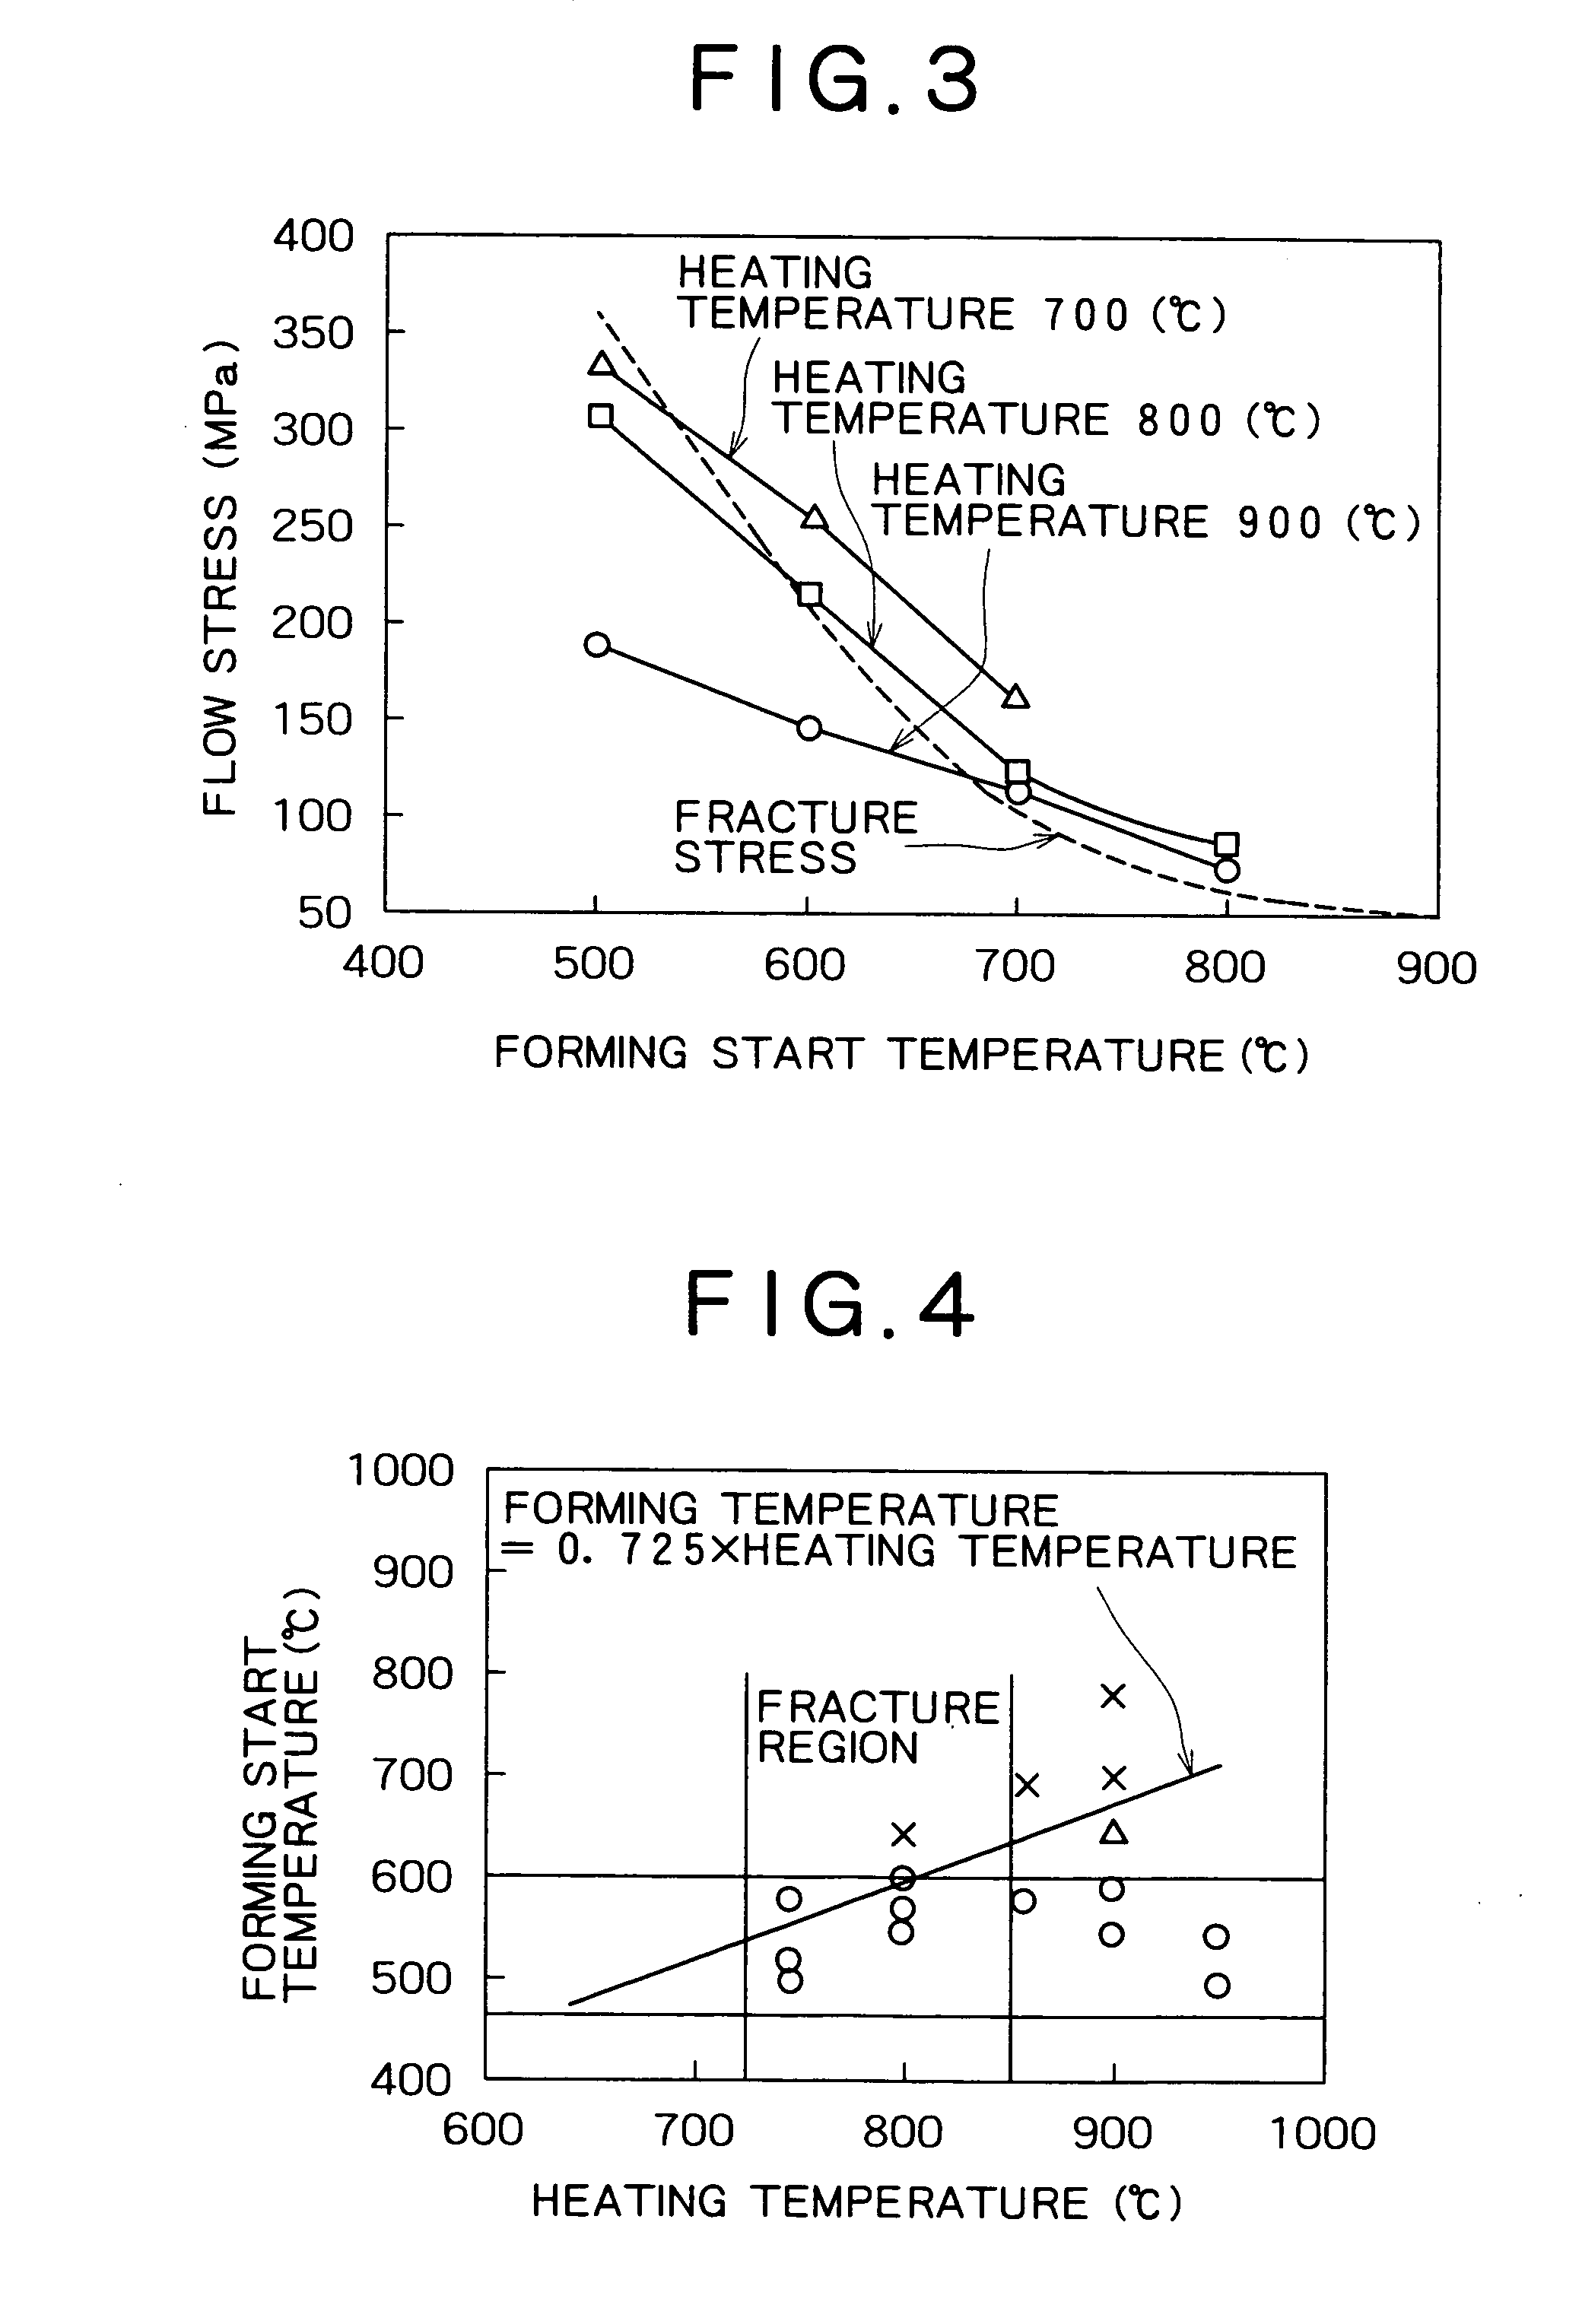 Production method of warm- or hot-formed product